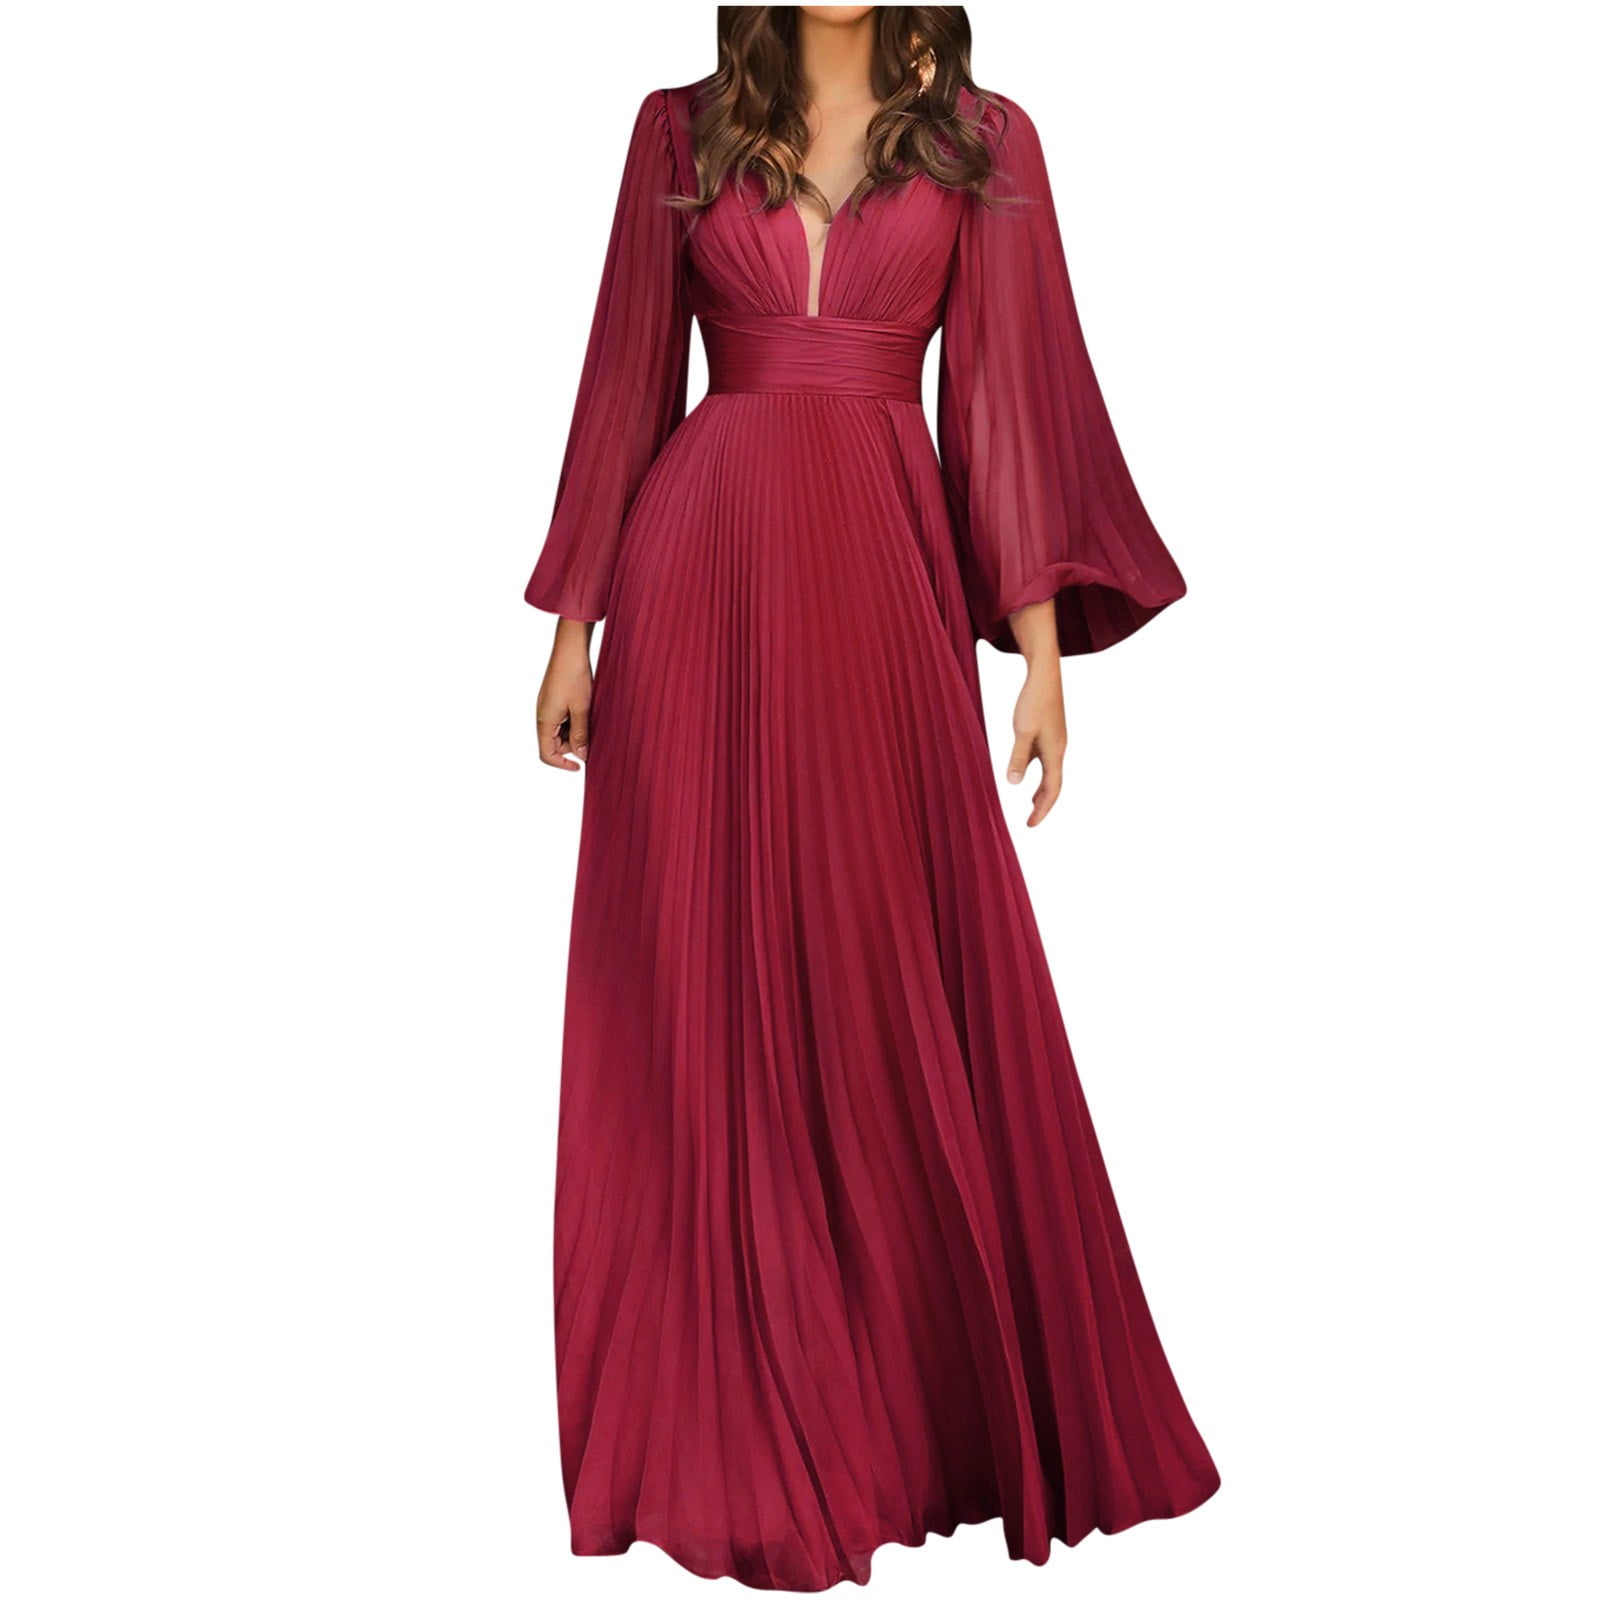 Wearing Maxi-Length Dresses for Weddings